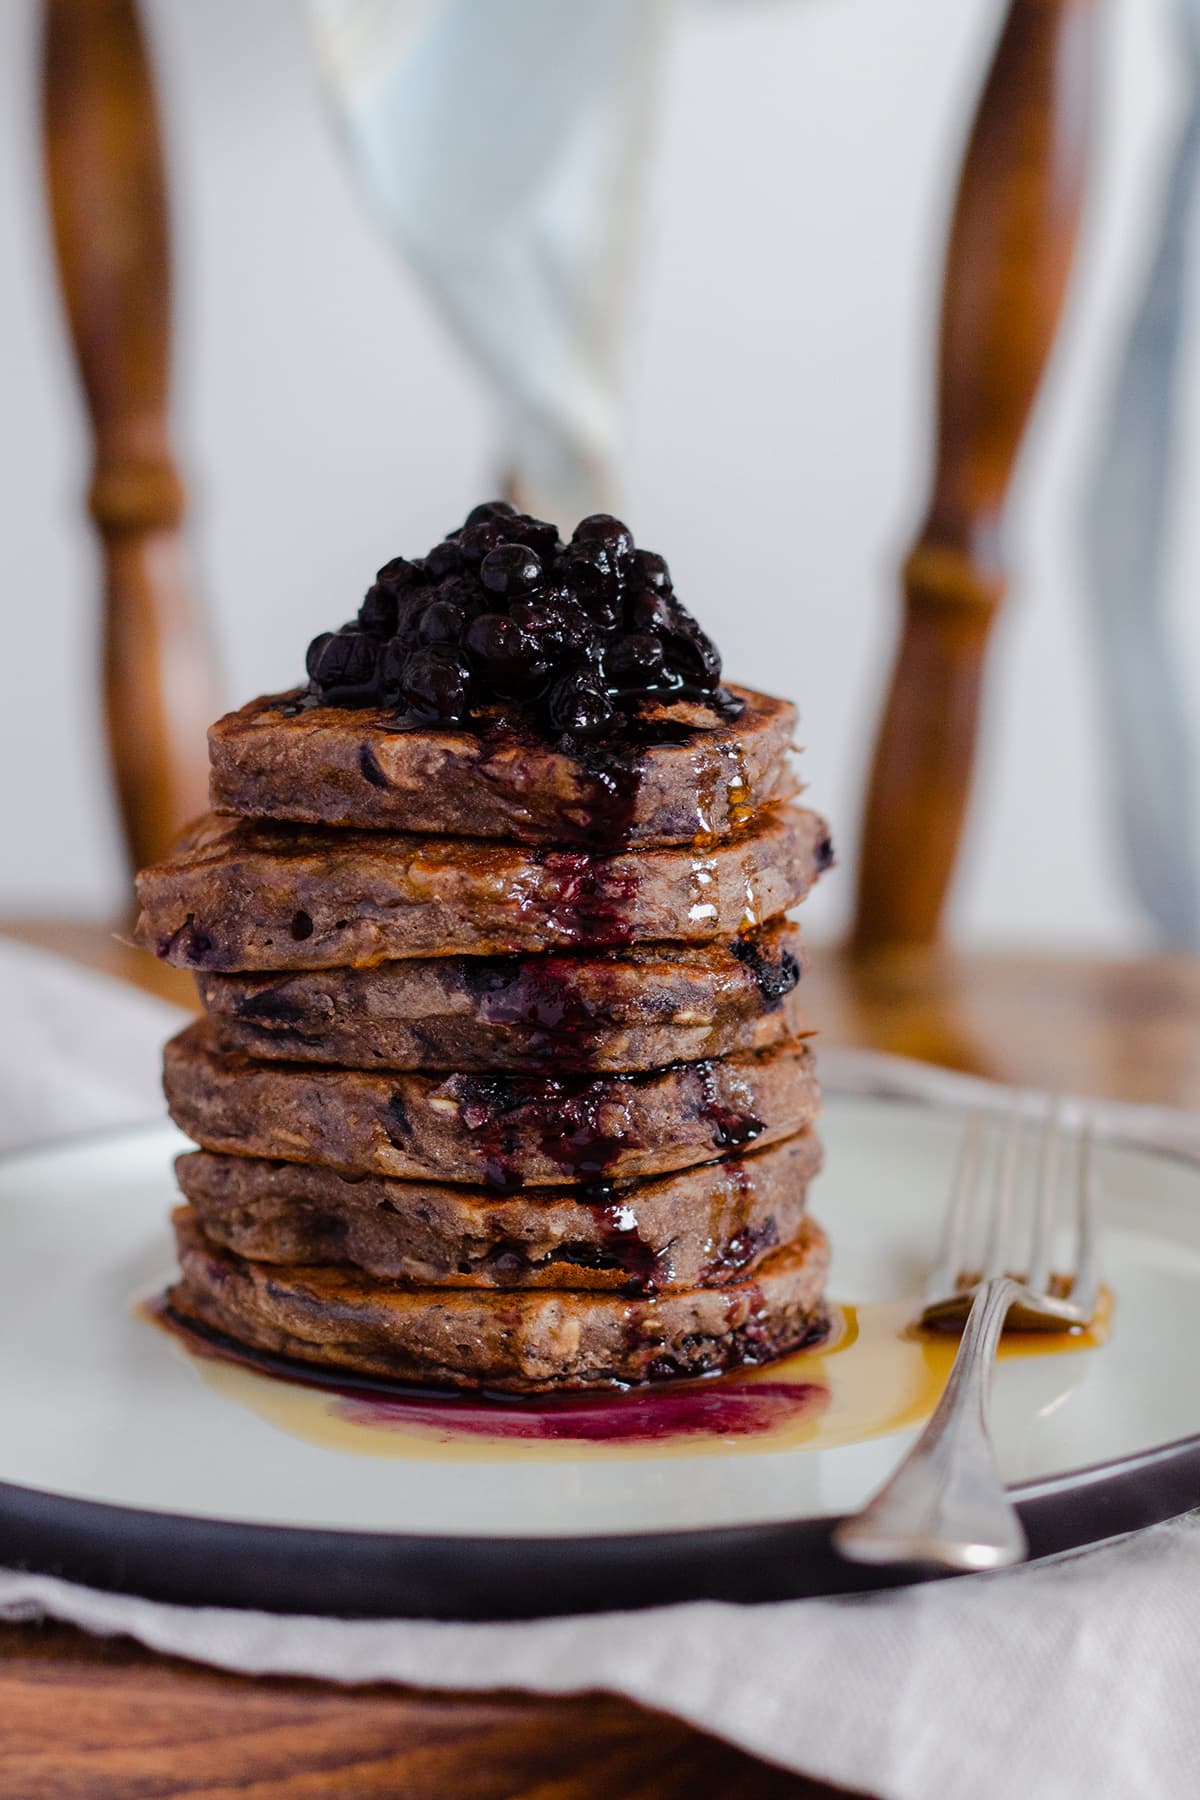 Buckwheat banana blueberry pancakes stacked on a beige plate on a chair.